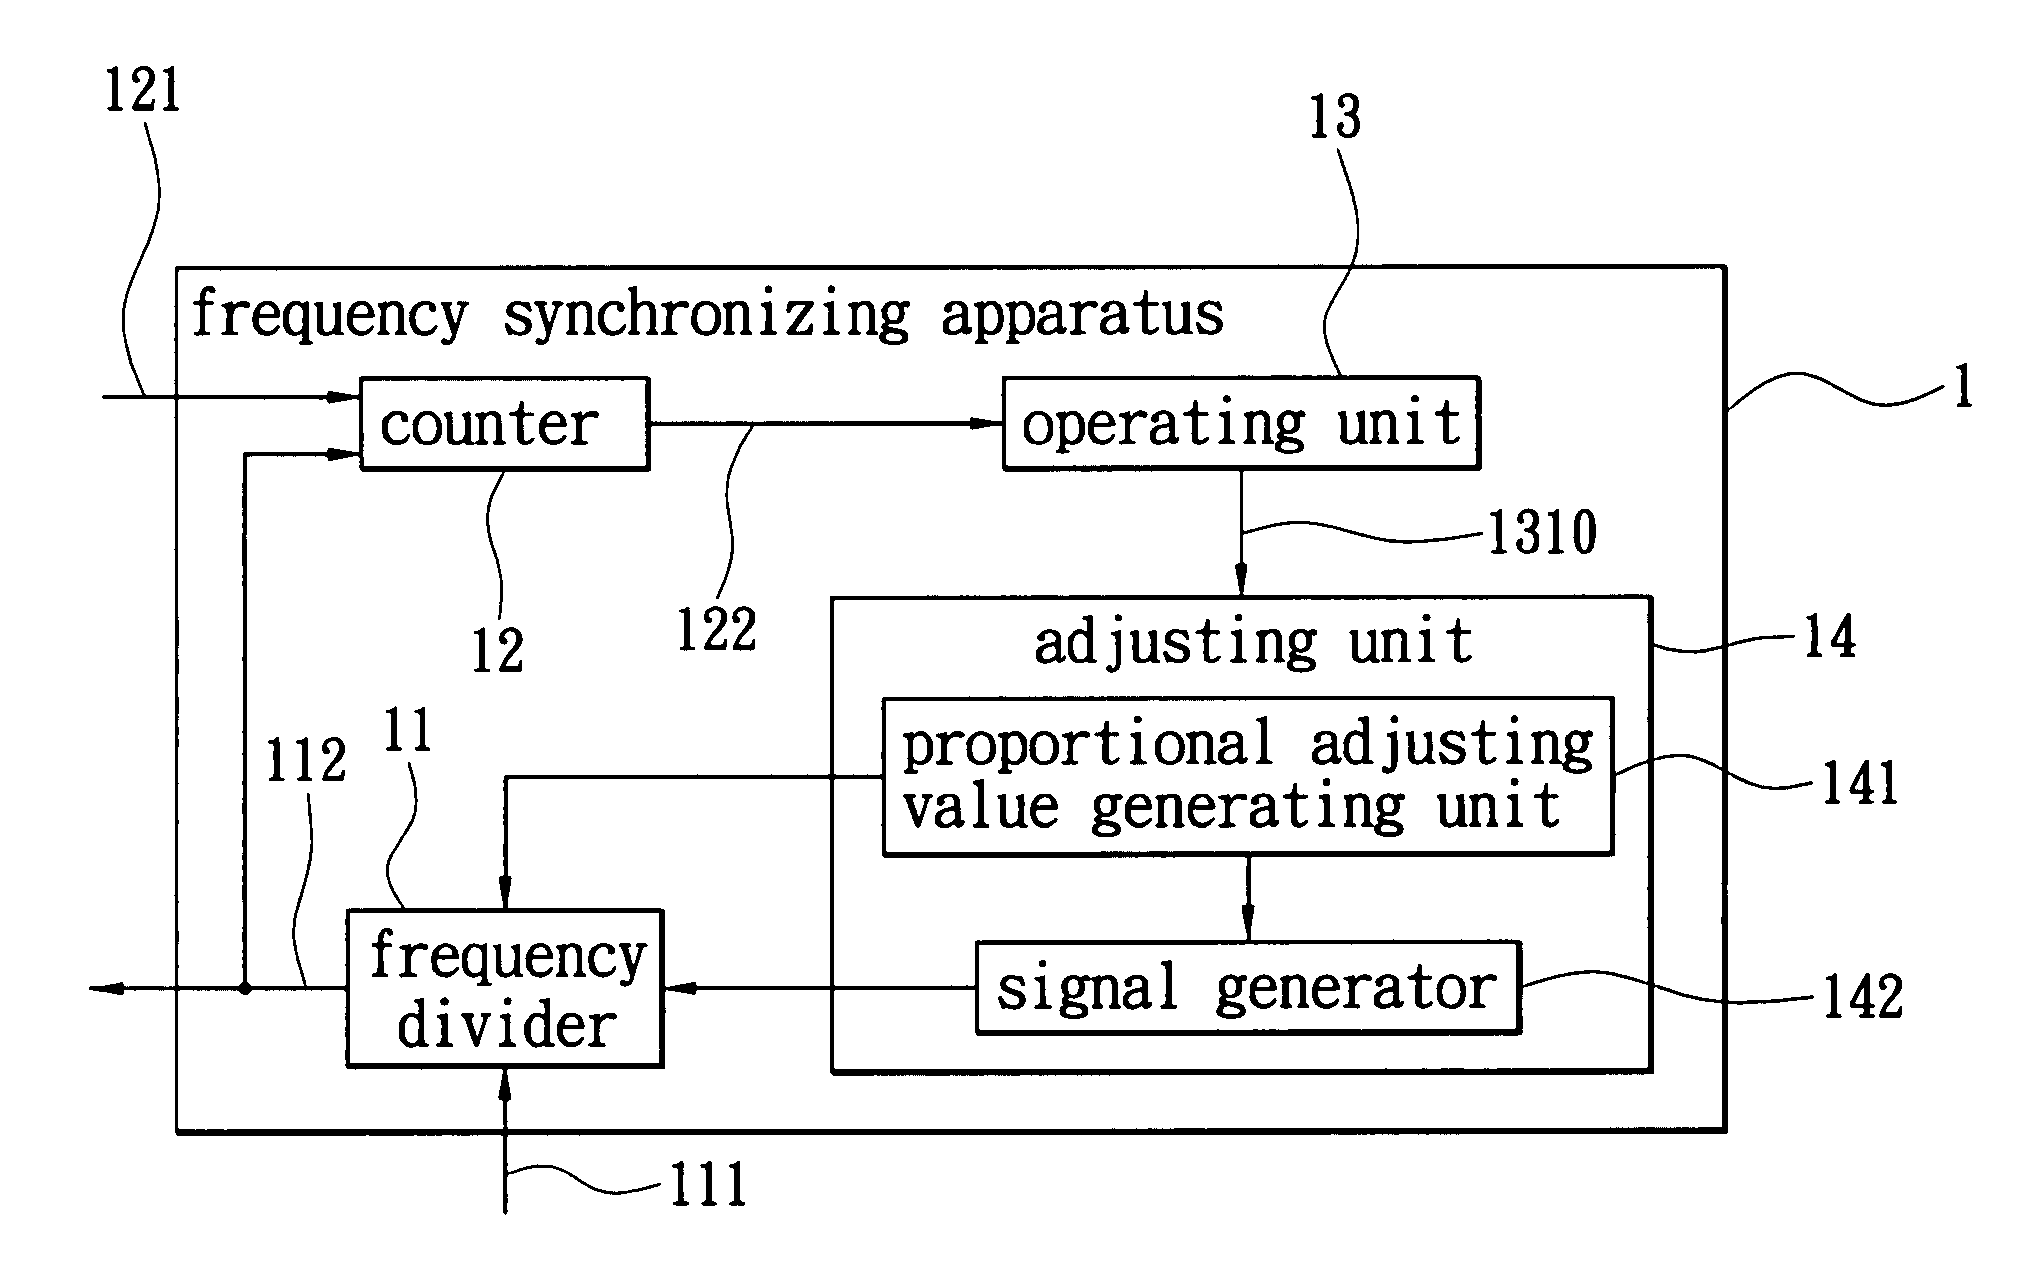 USB frequency synchronizing apparatus and method of synchronizing frequencies